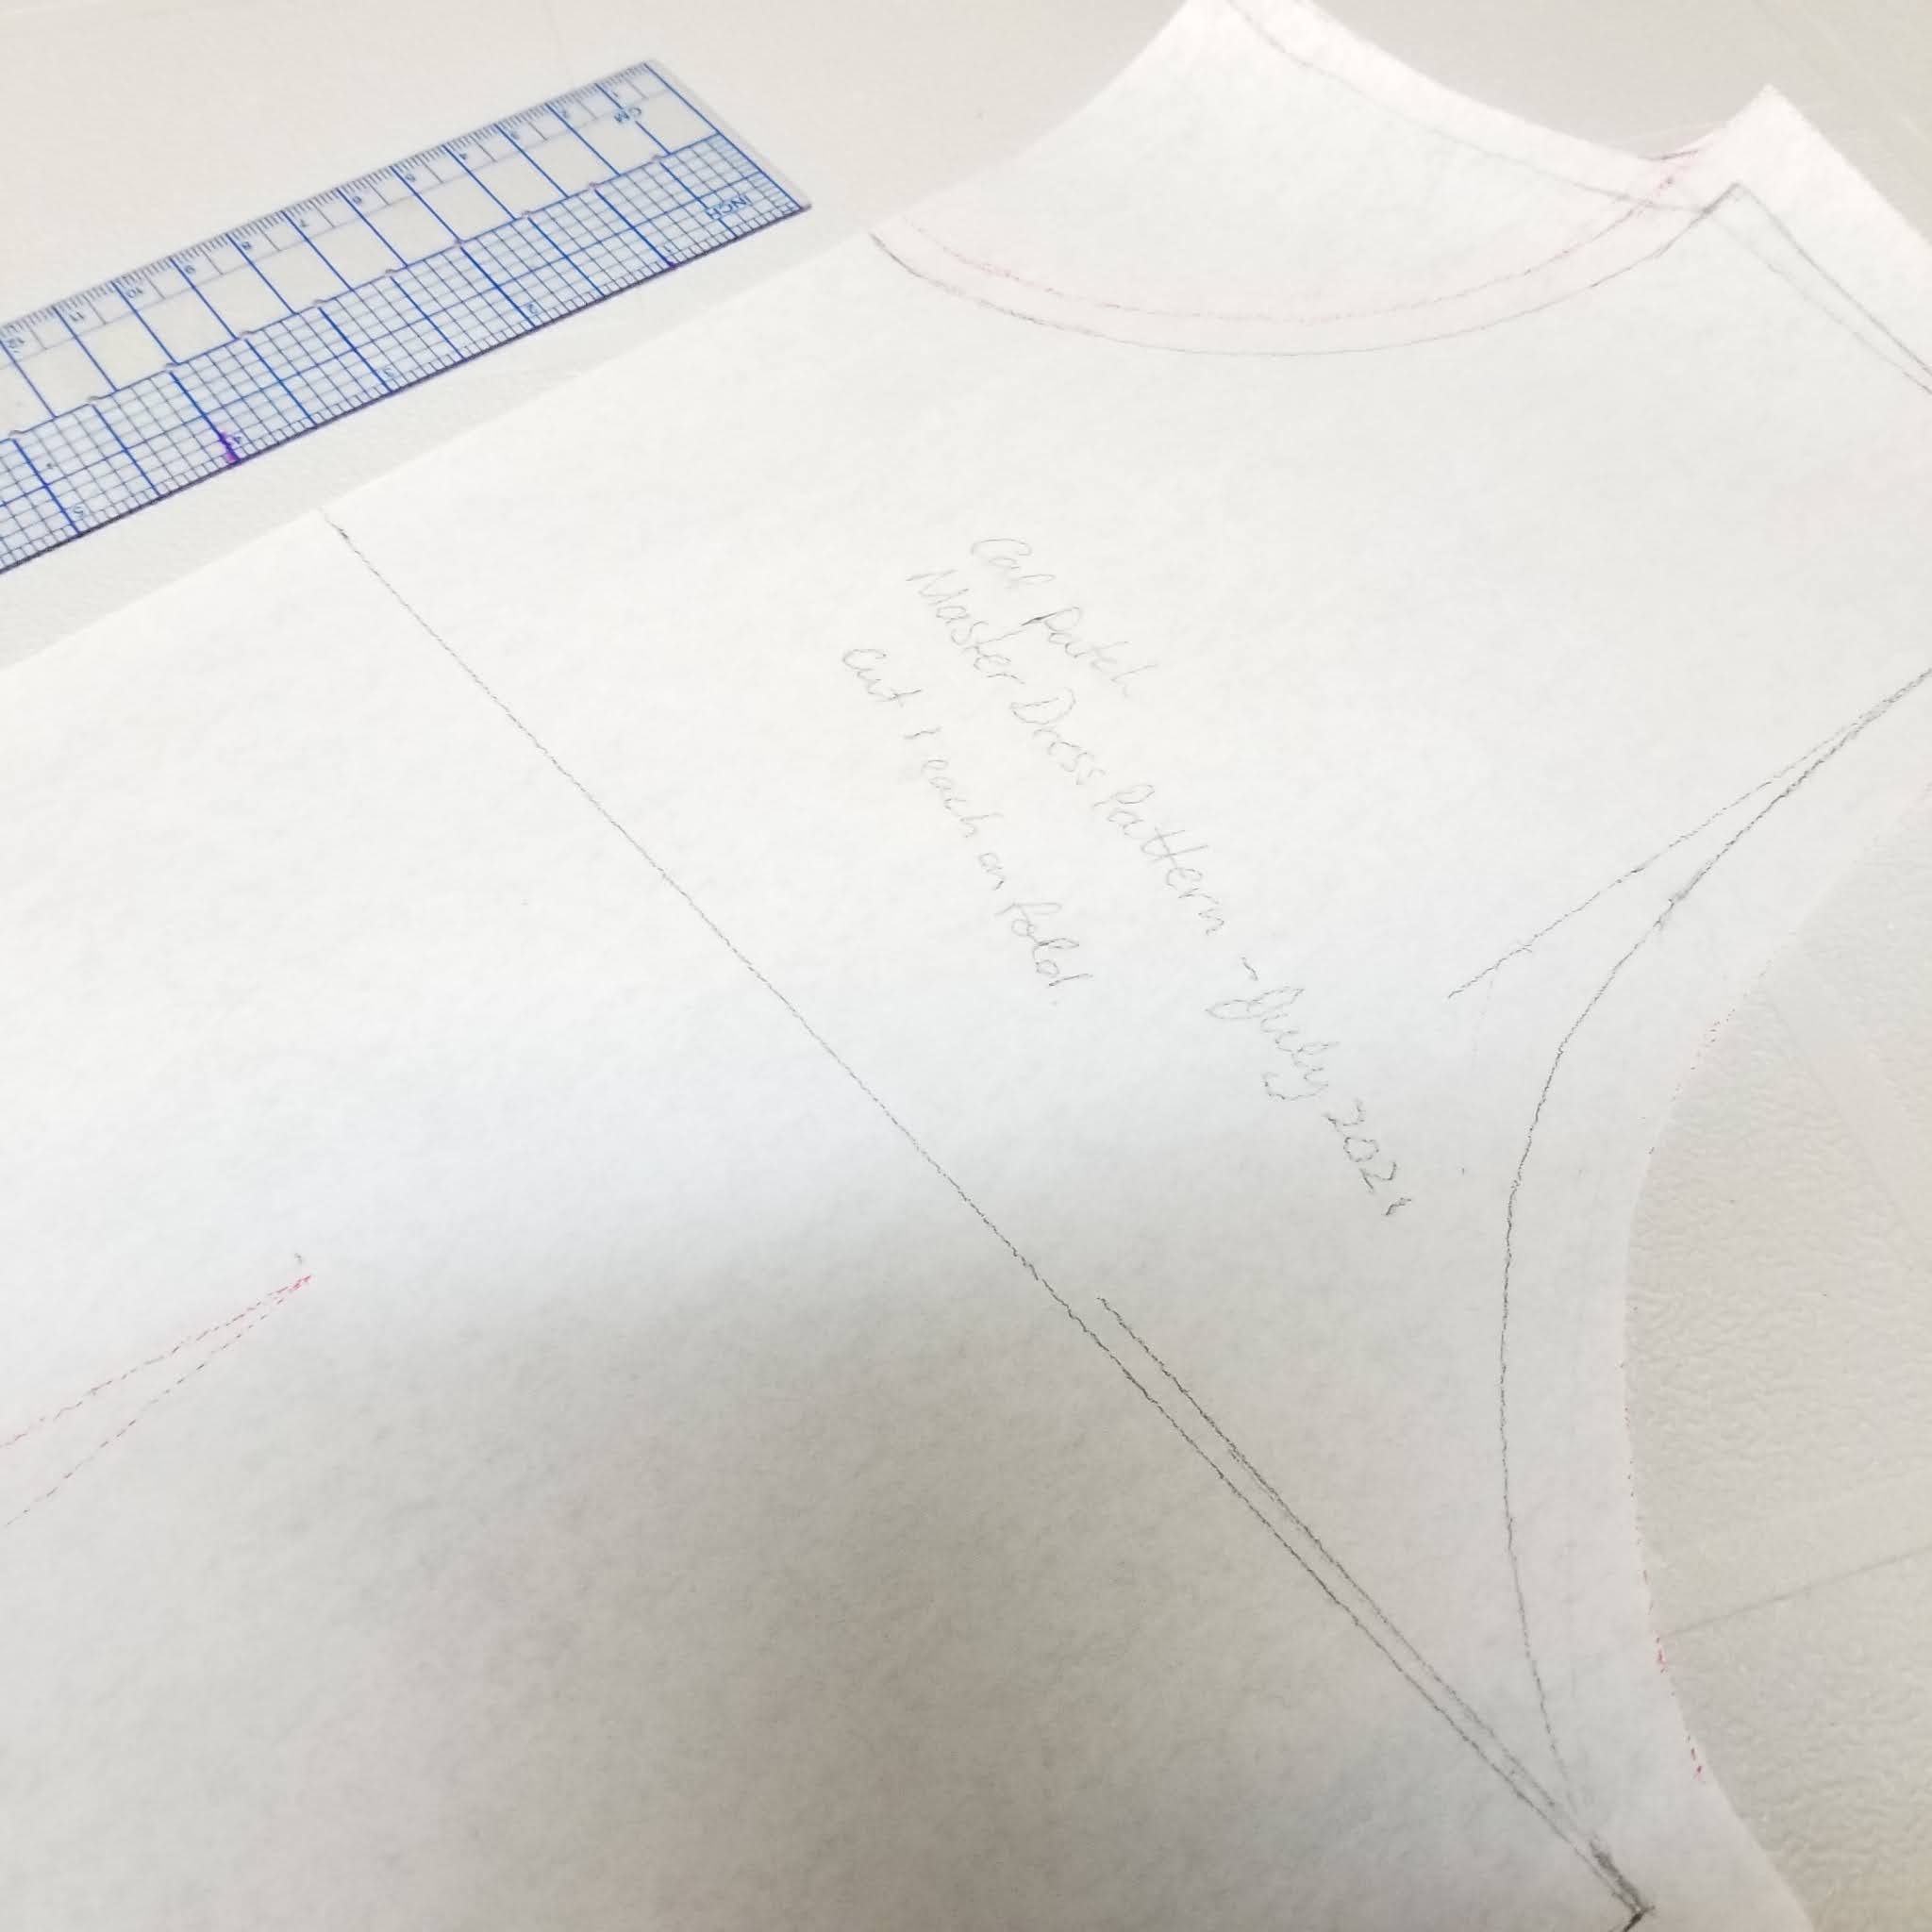 Pattern Drafting: Drafting Patterns Using Measurements - The Creative  Curator